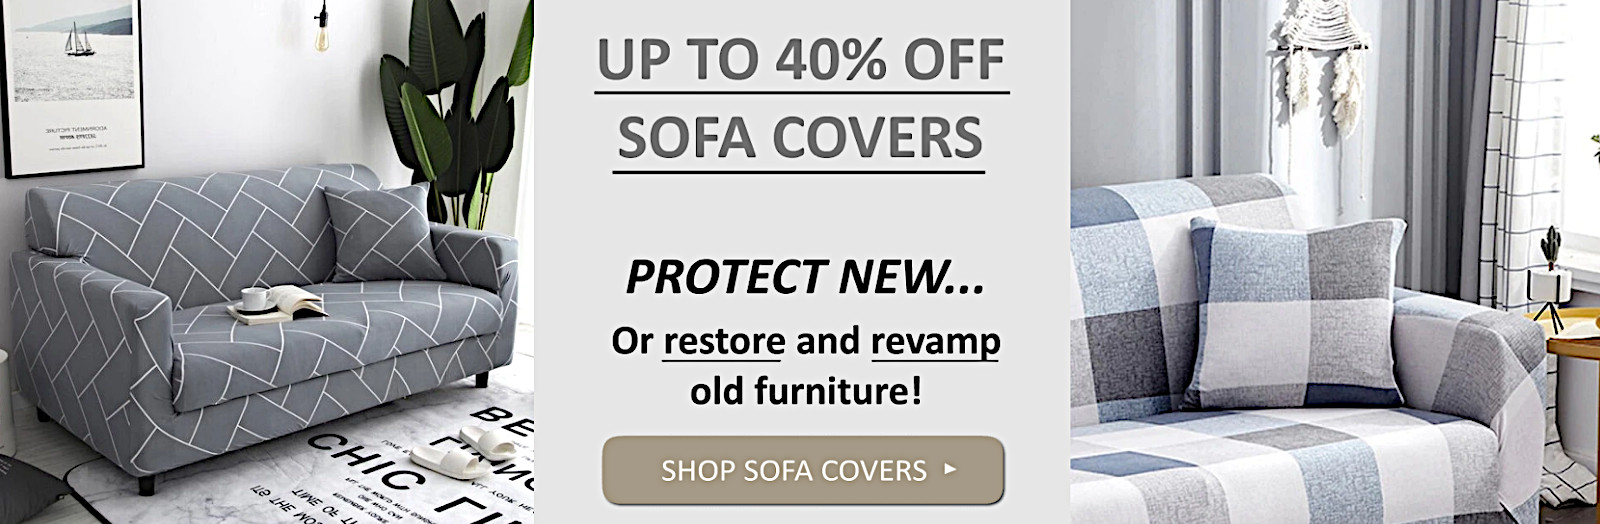 Cost-effective sofa covers